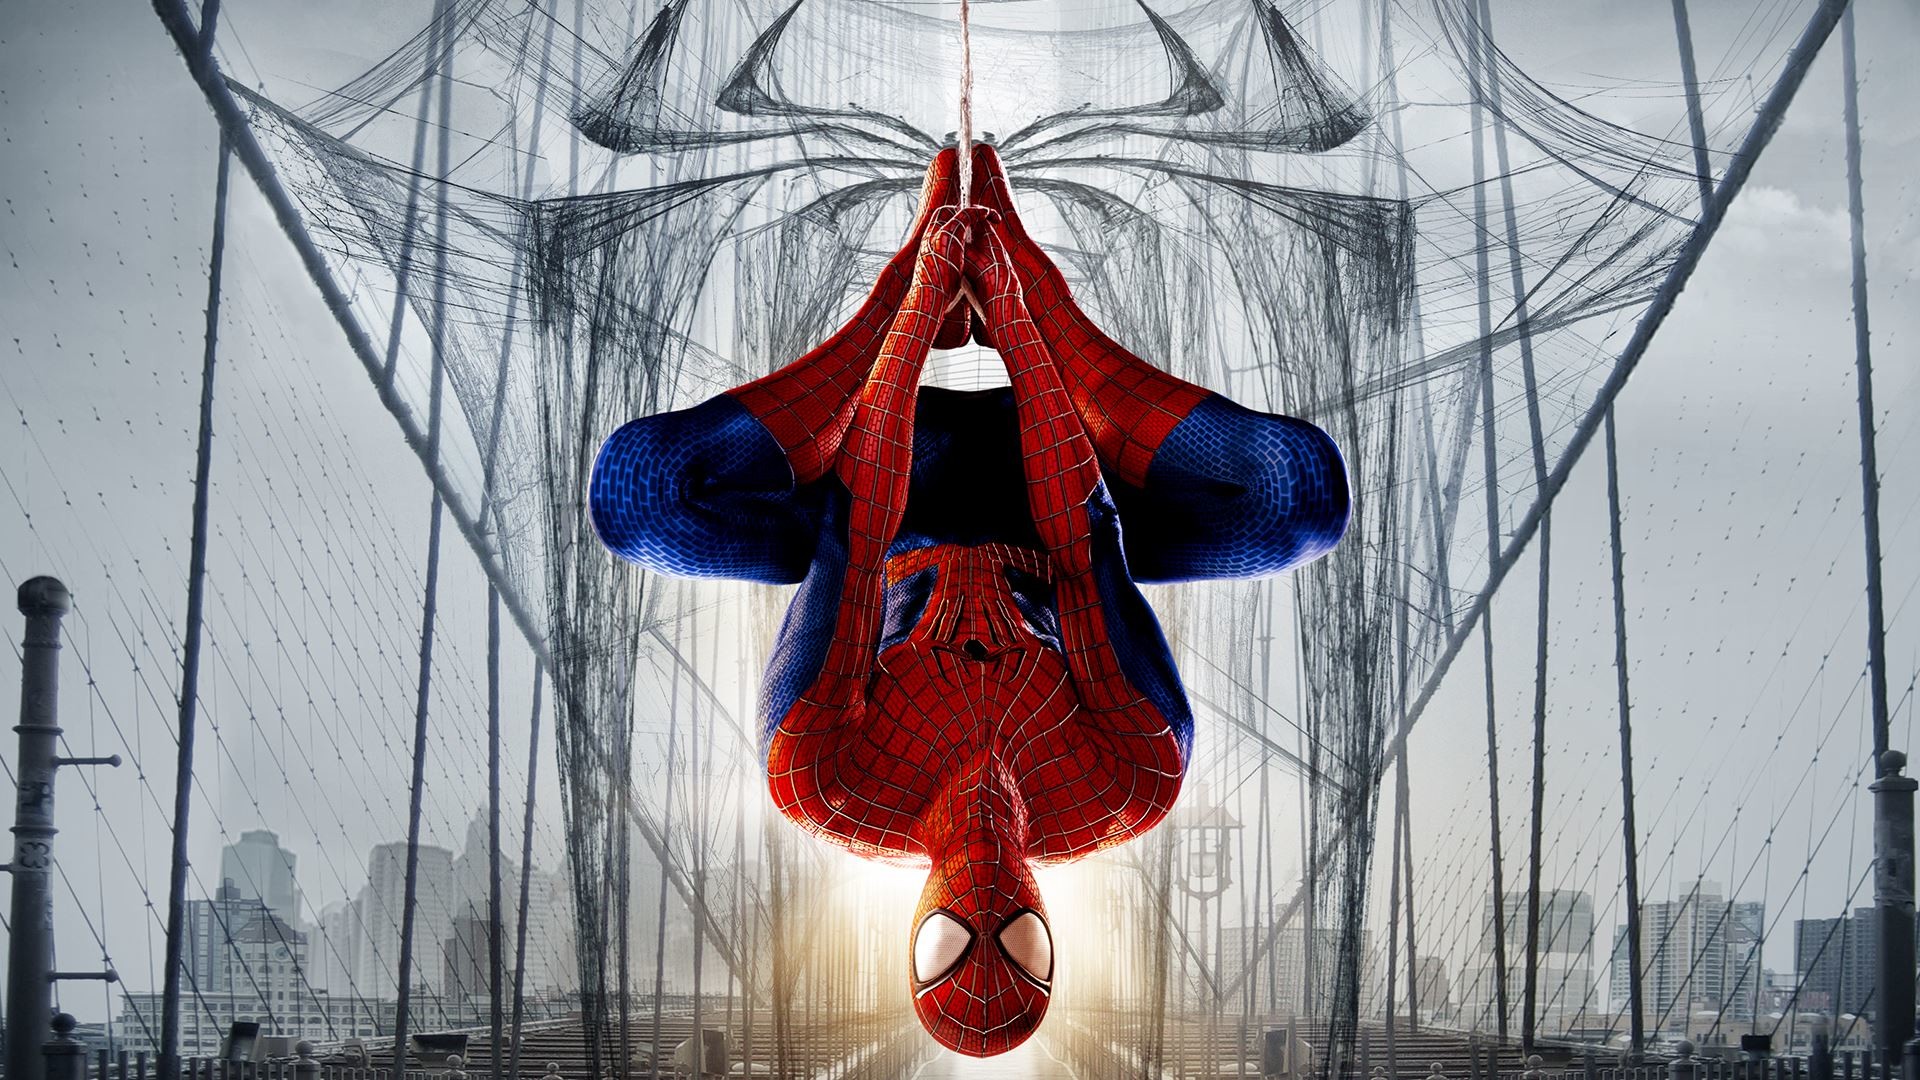 1920x1080 the amazing spider man 2 new wide | Wallpaper | Pinterest | Amazing spider,  Spider-Man and Spider